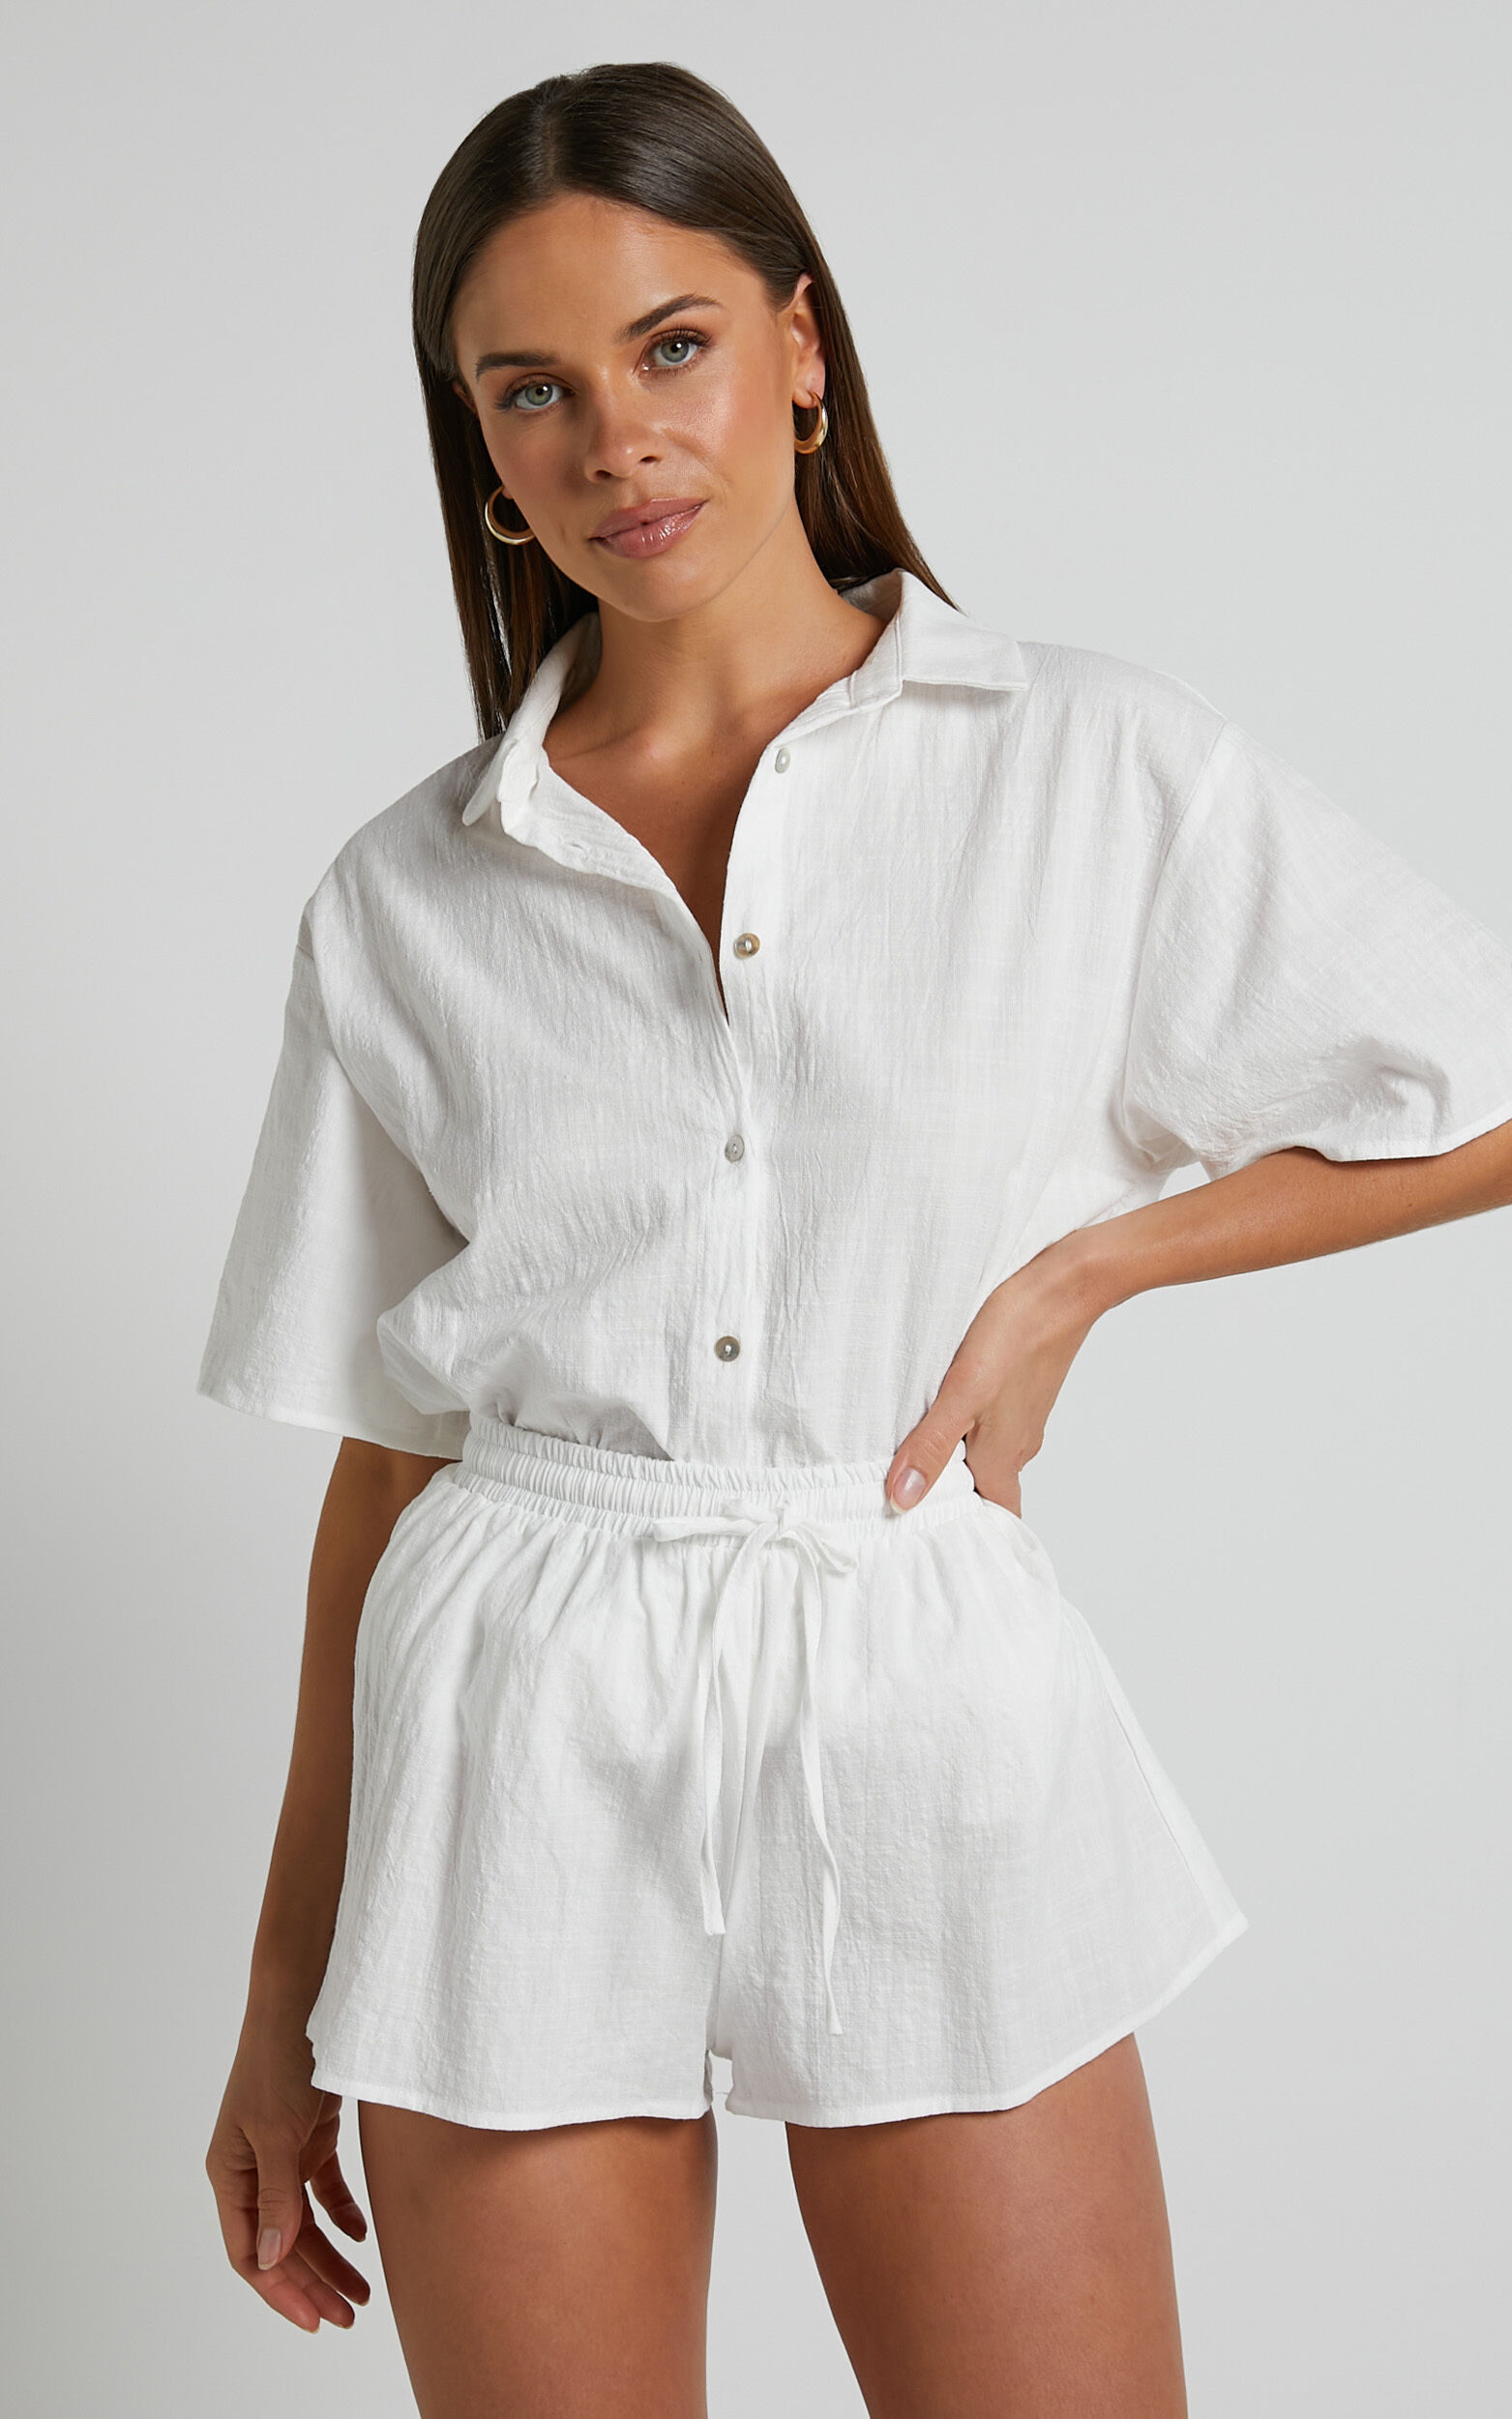 Vina del Mar Button Up Shirt and Shorts Two Piece Set in White - 04, WHT2, super-hi-res image number null